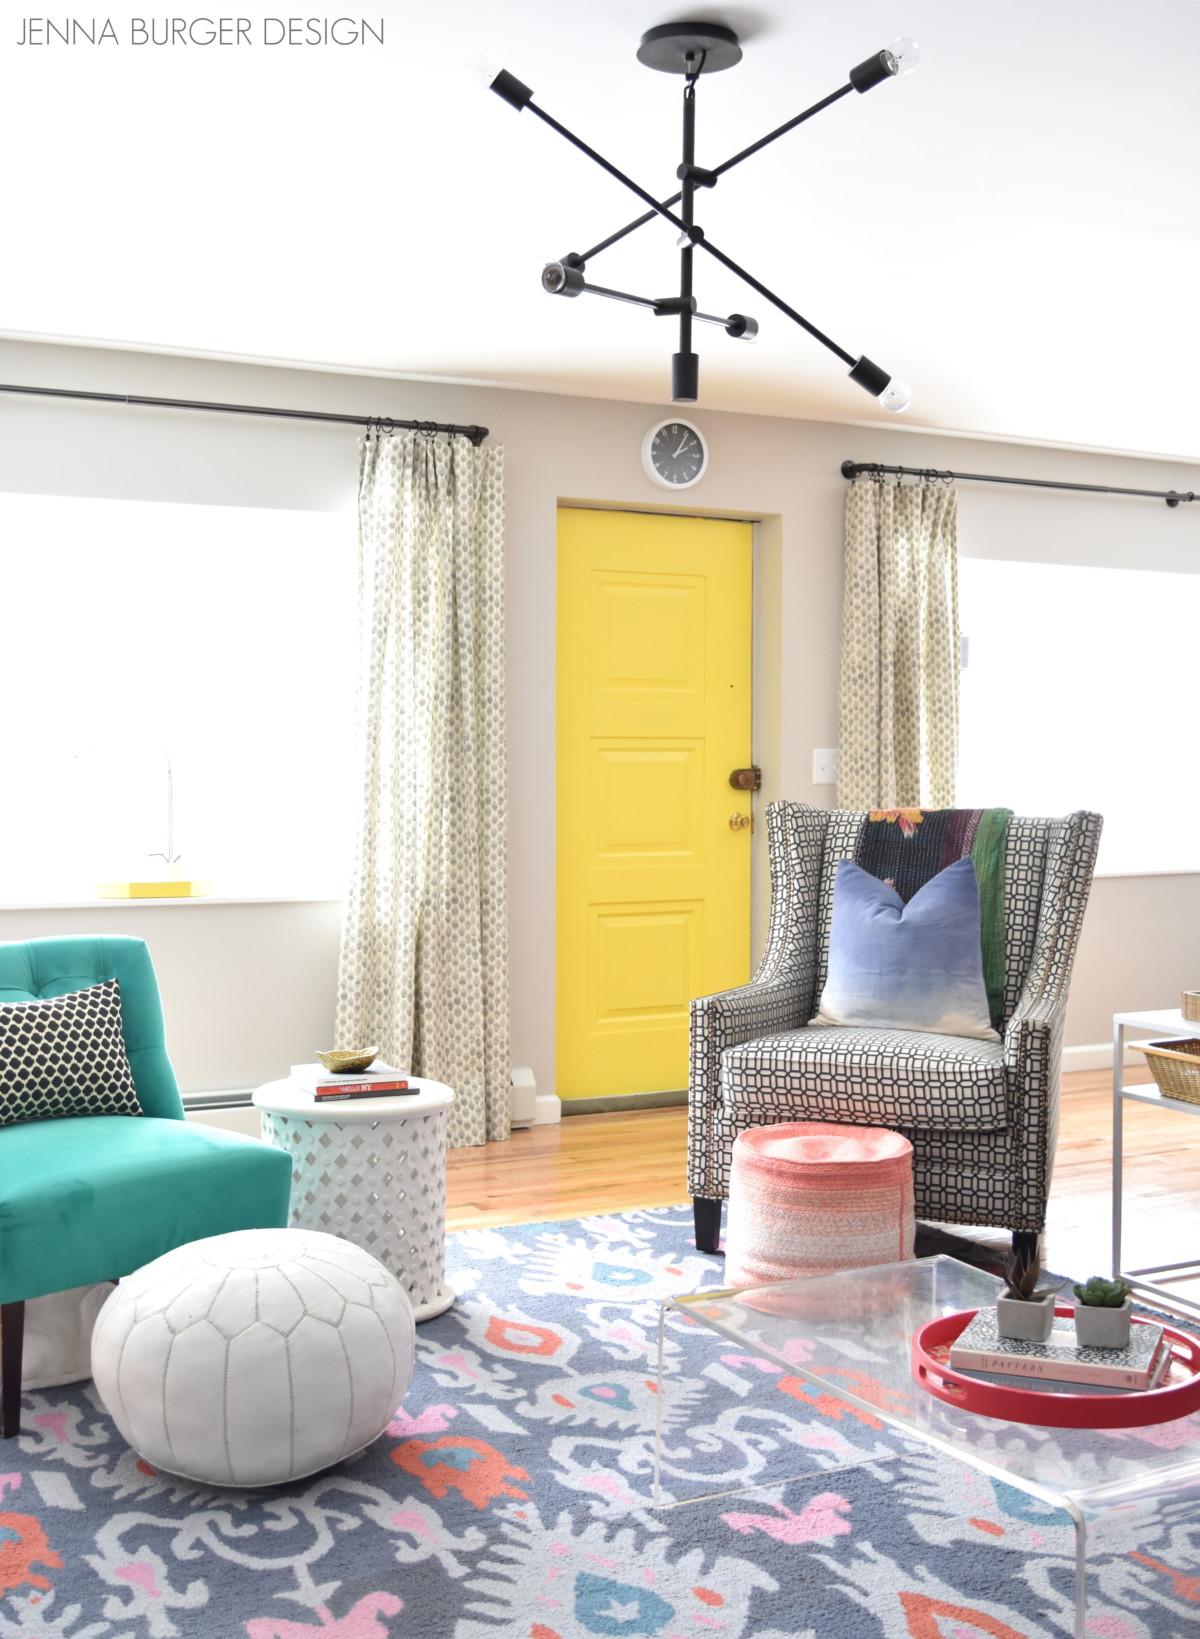 Creating a Cohesive Color Palette throughout the home